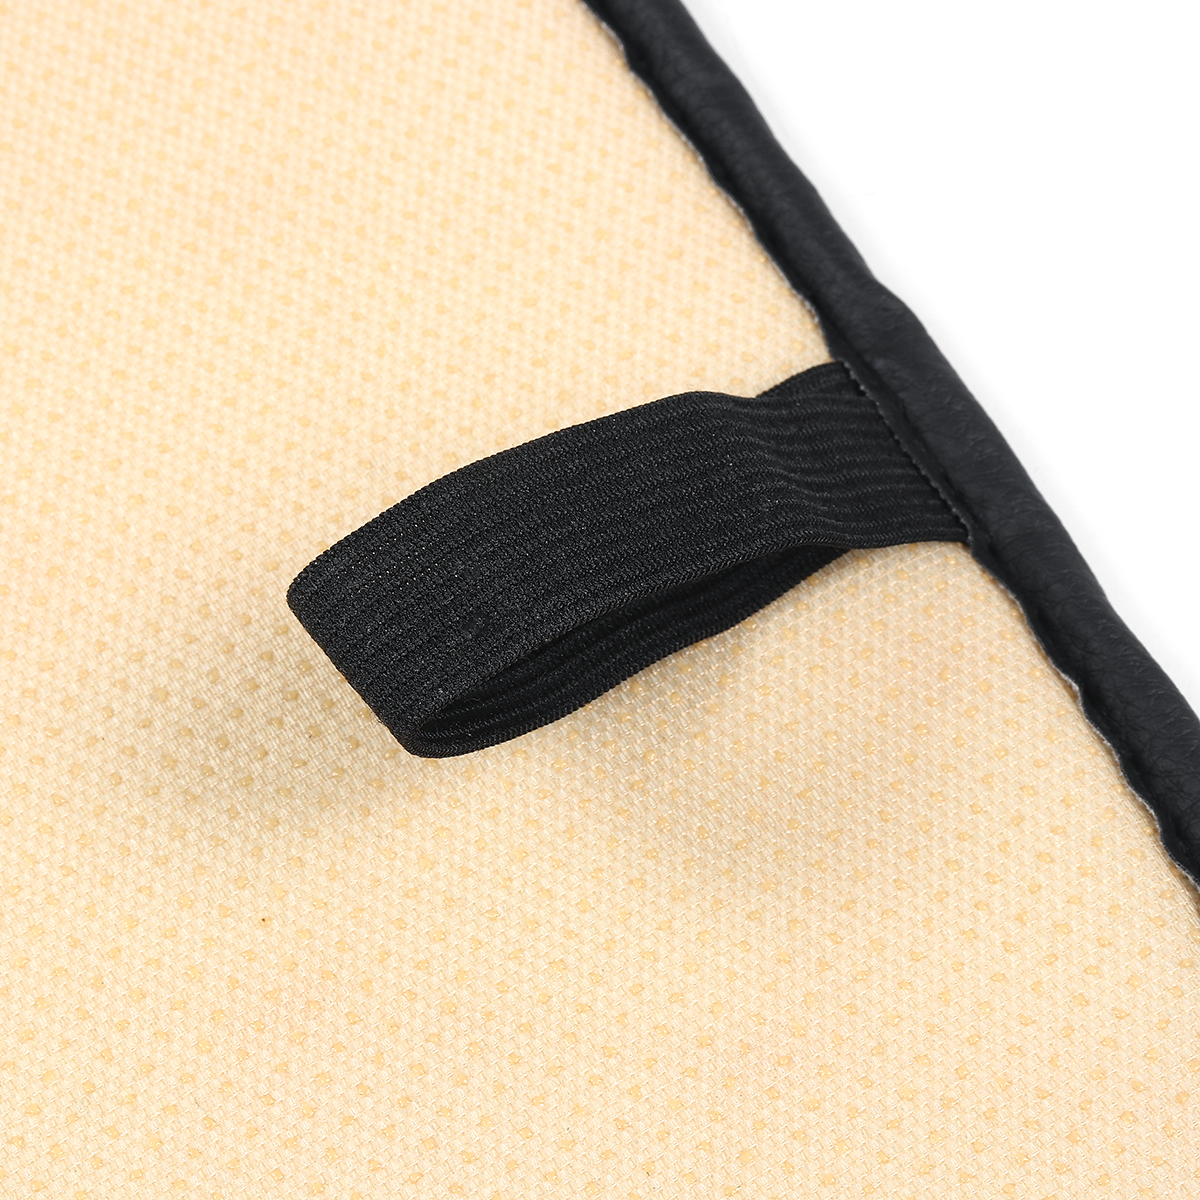 Universal Car Seat Pad Mat Cushion Cover Protector PU Leather Breathable Auto